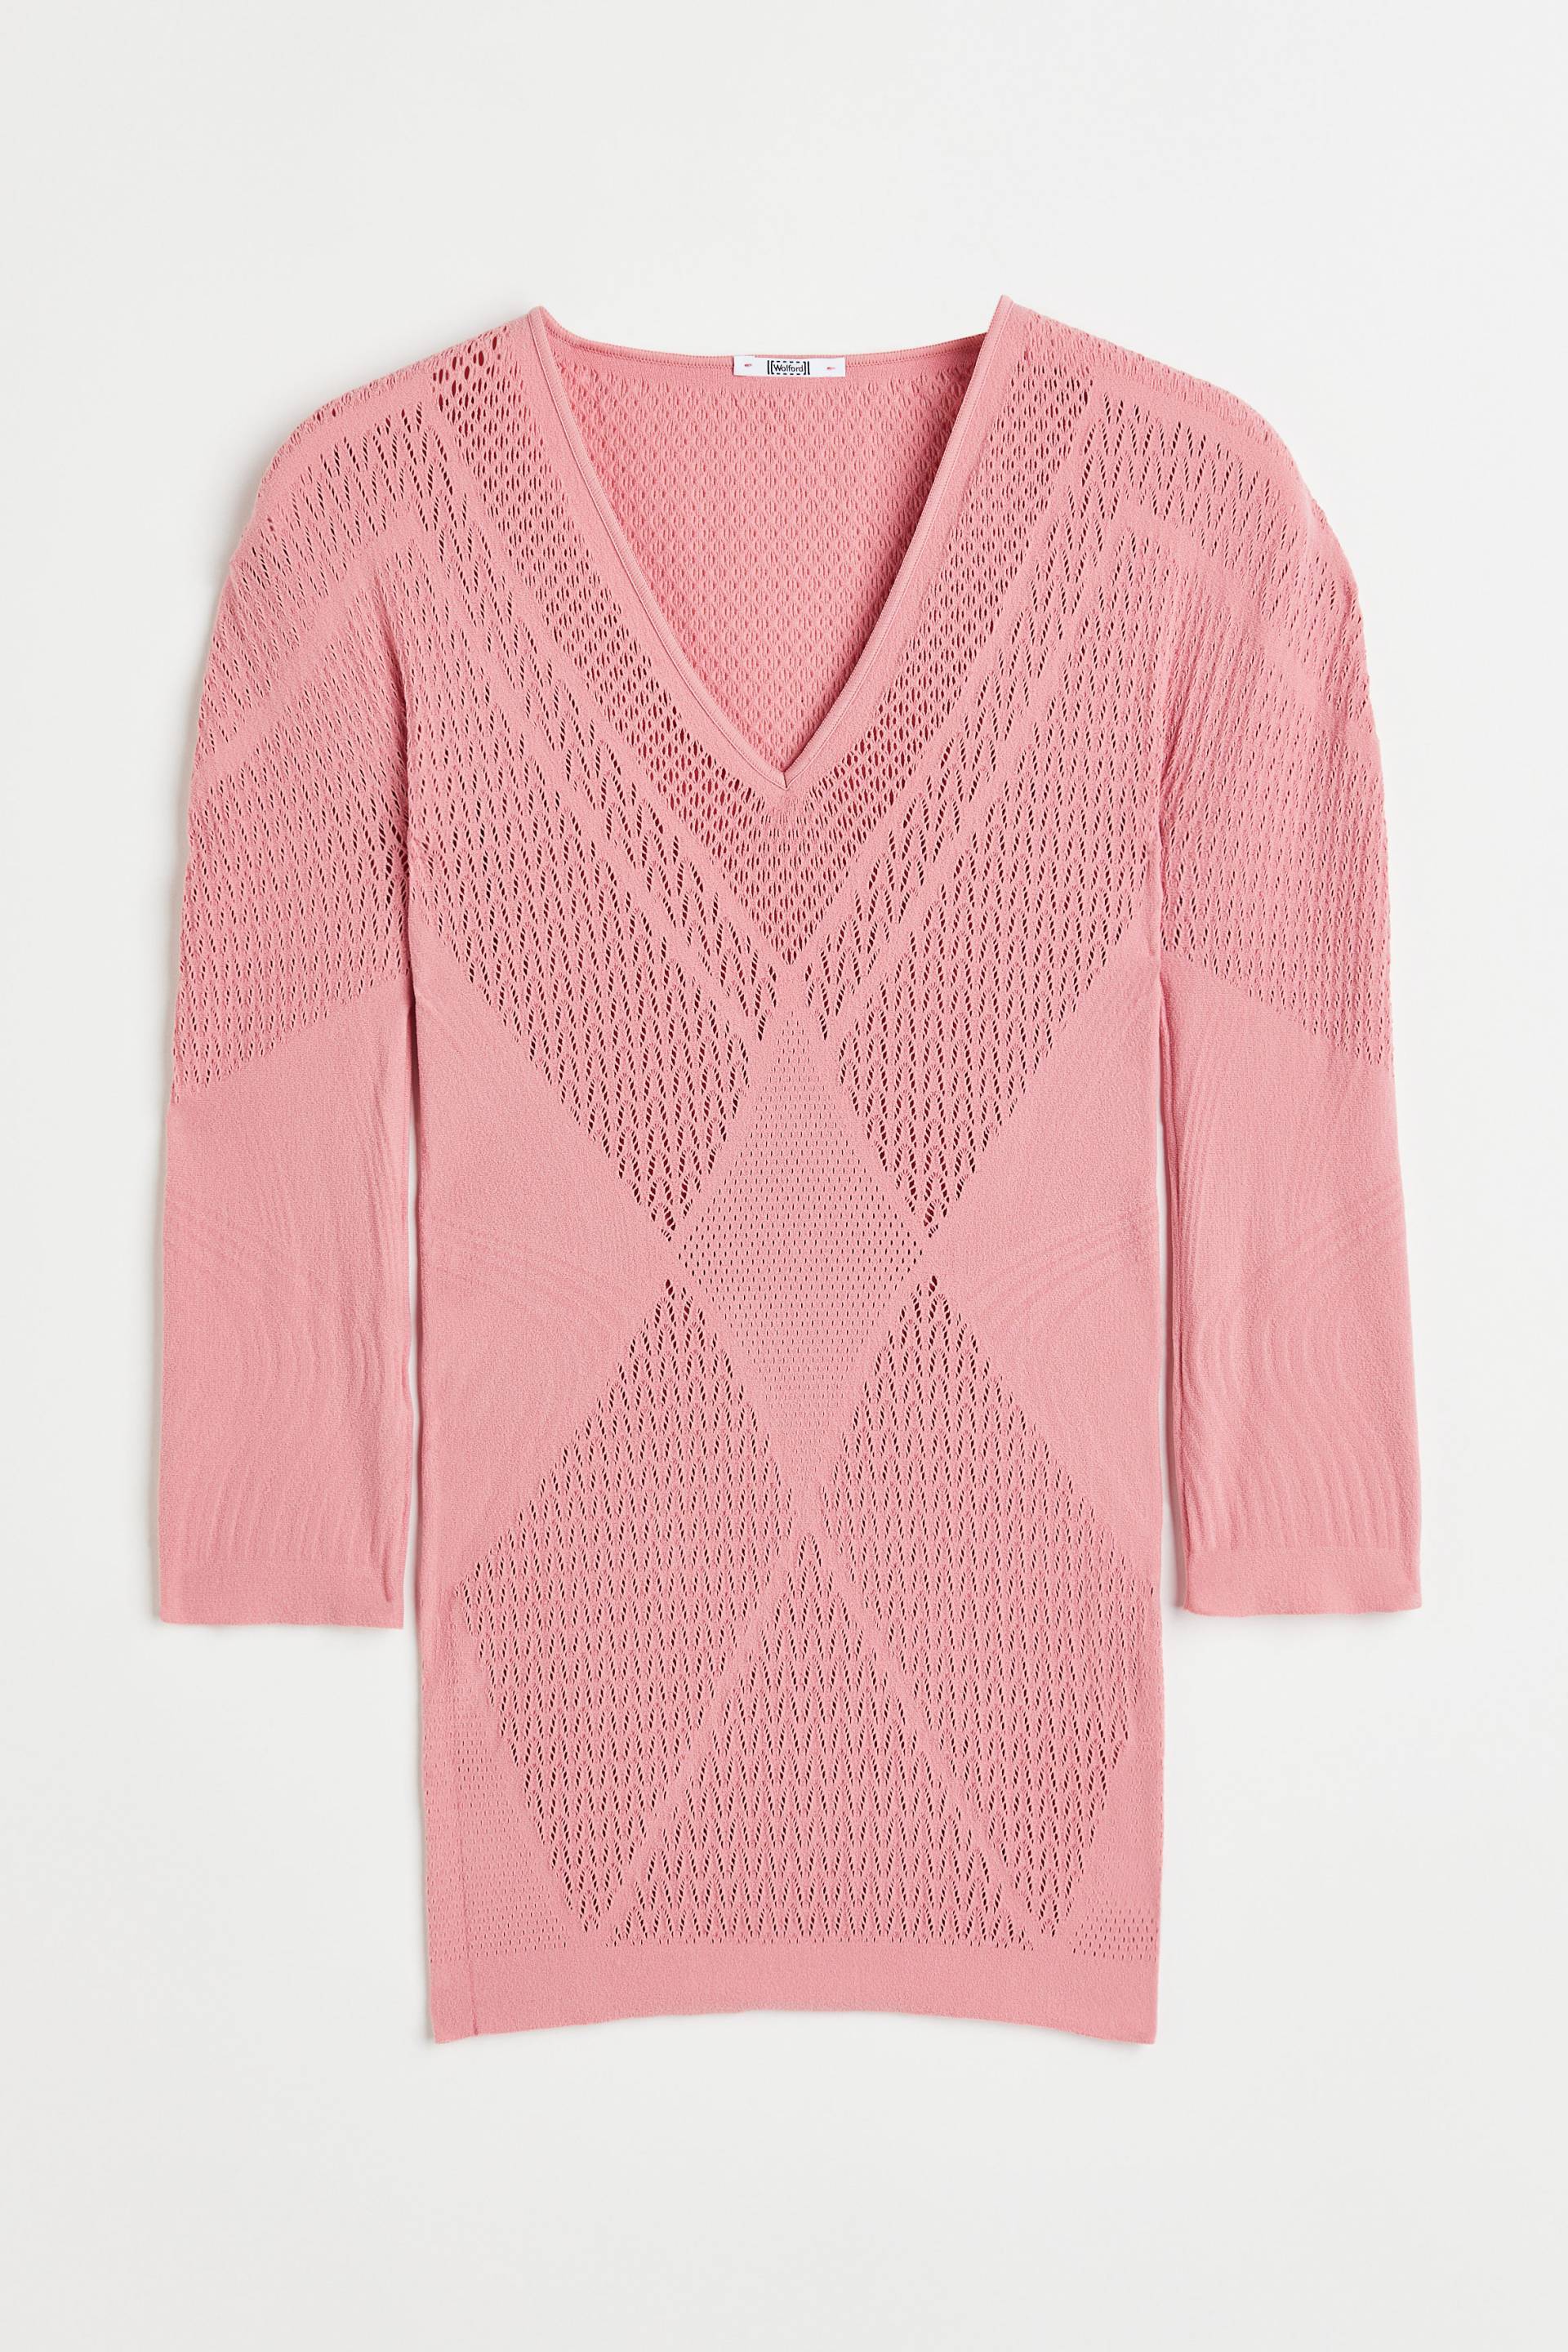 Wolford Romance Net Top Long Sleeves Pink, Tops in Größe XS von Wolford